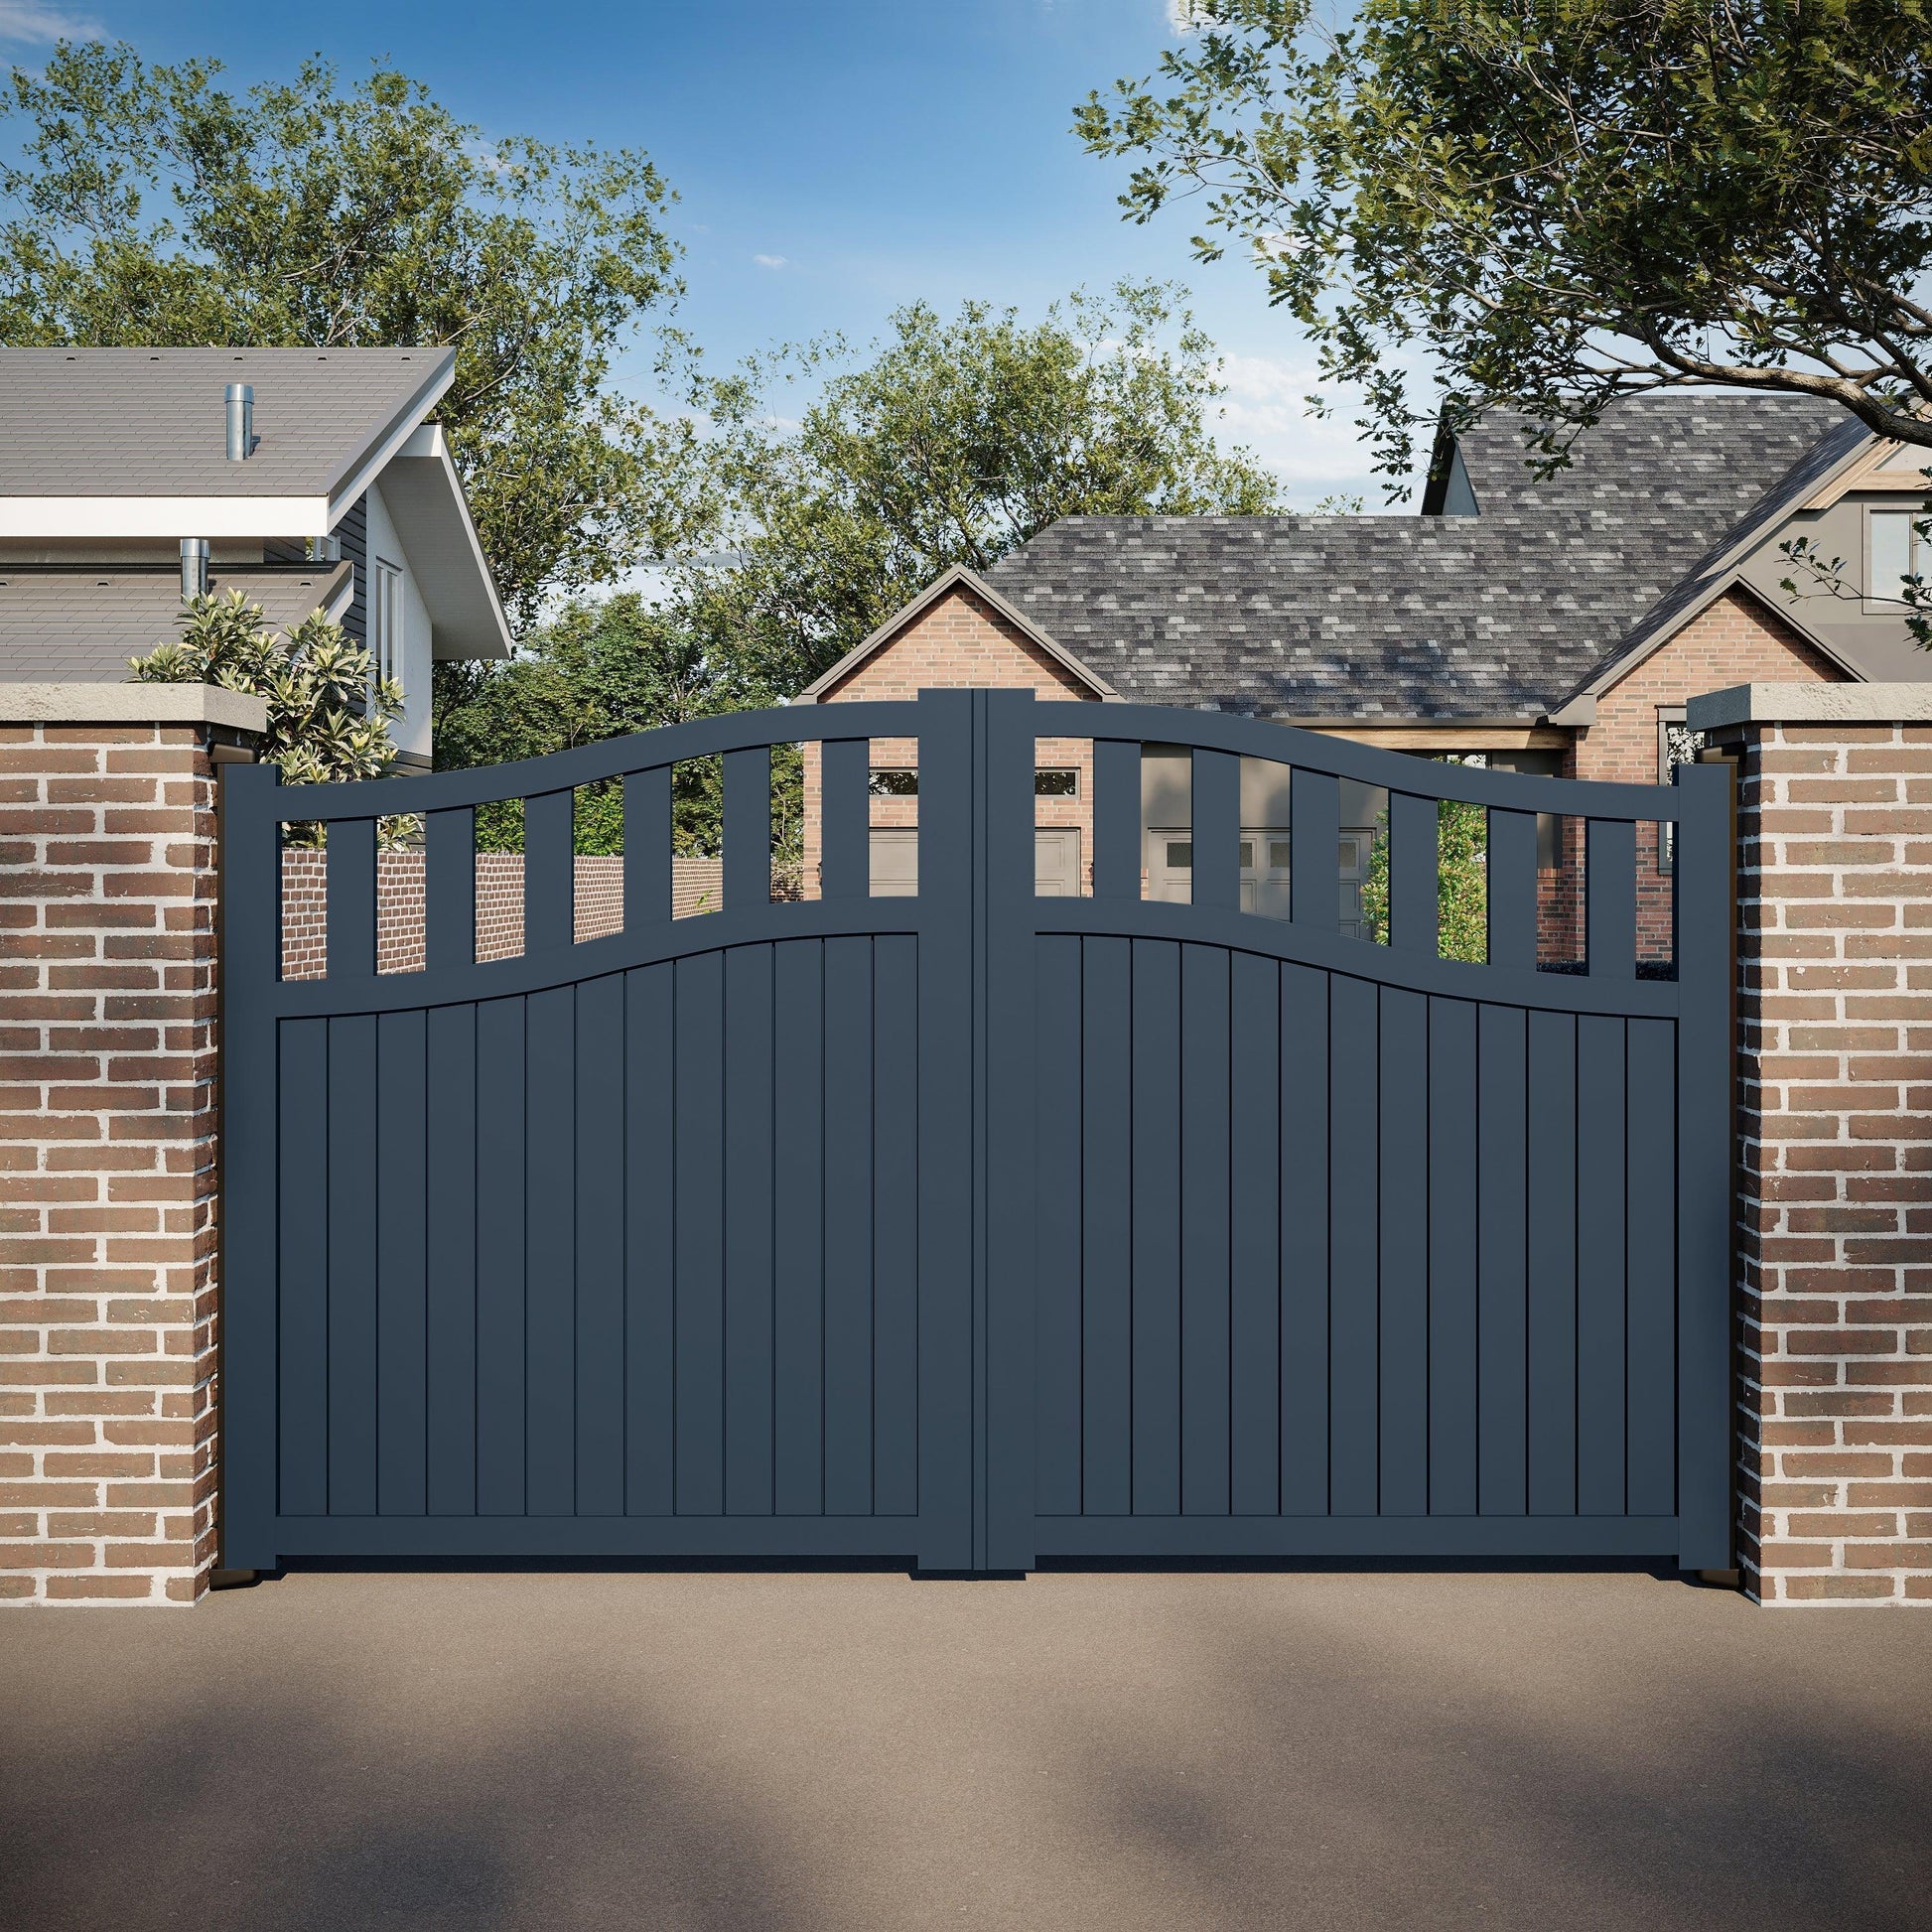 OpenTop Elegance | Aluminium Partial Privacy Driveway Gate - Residential Gates